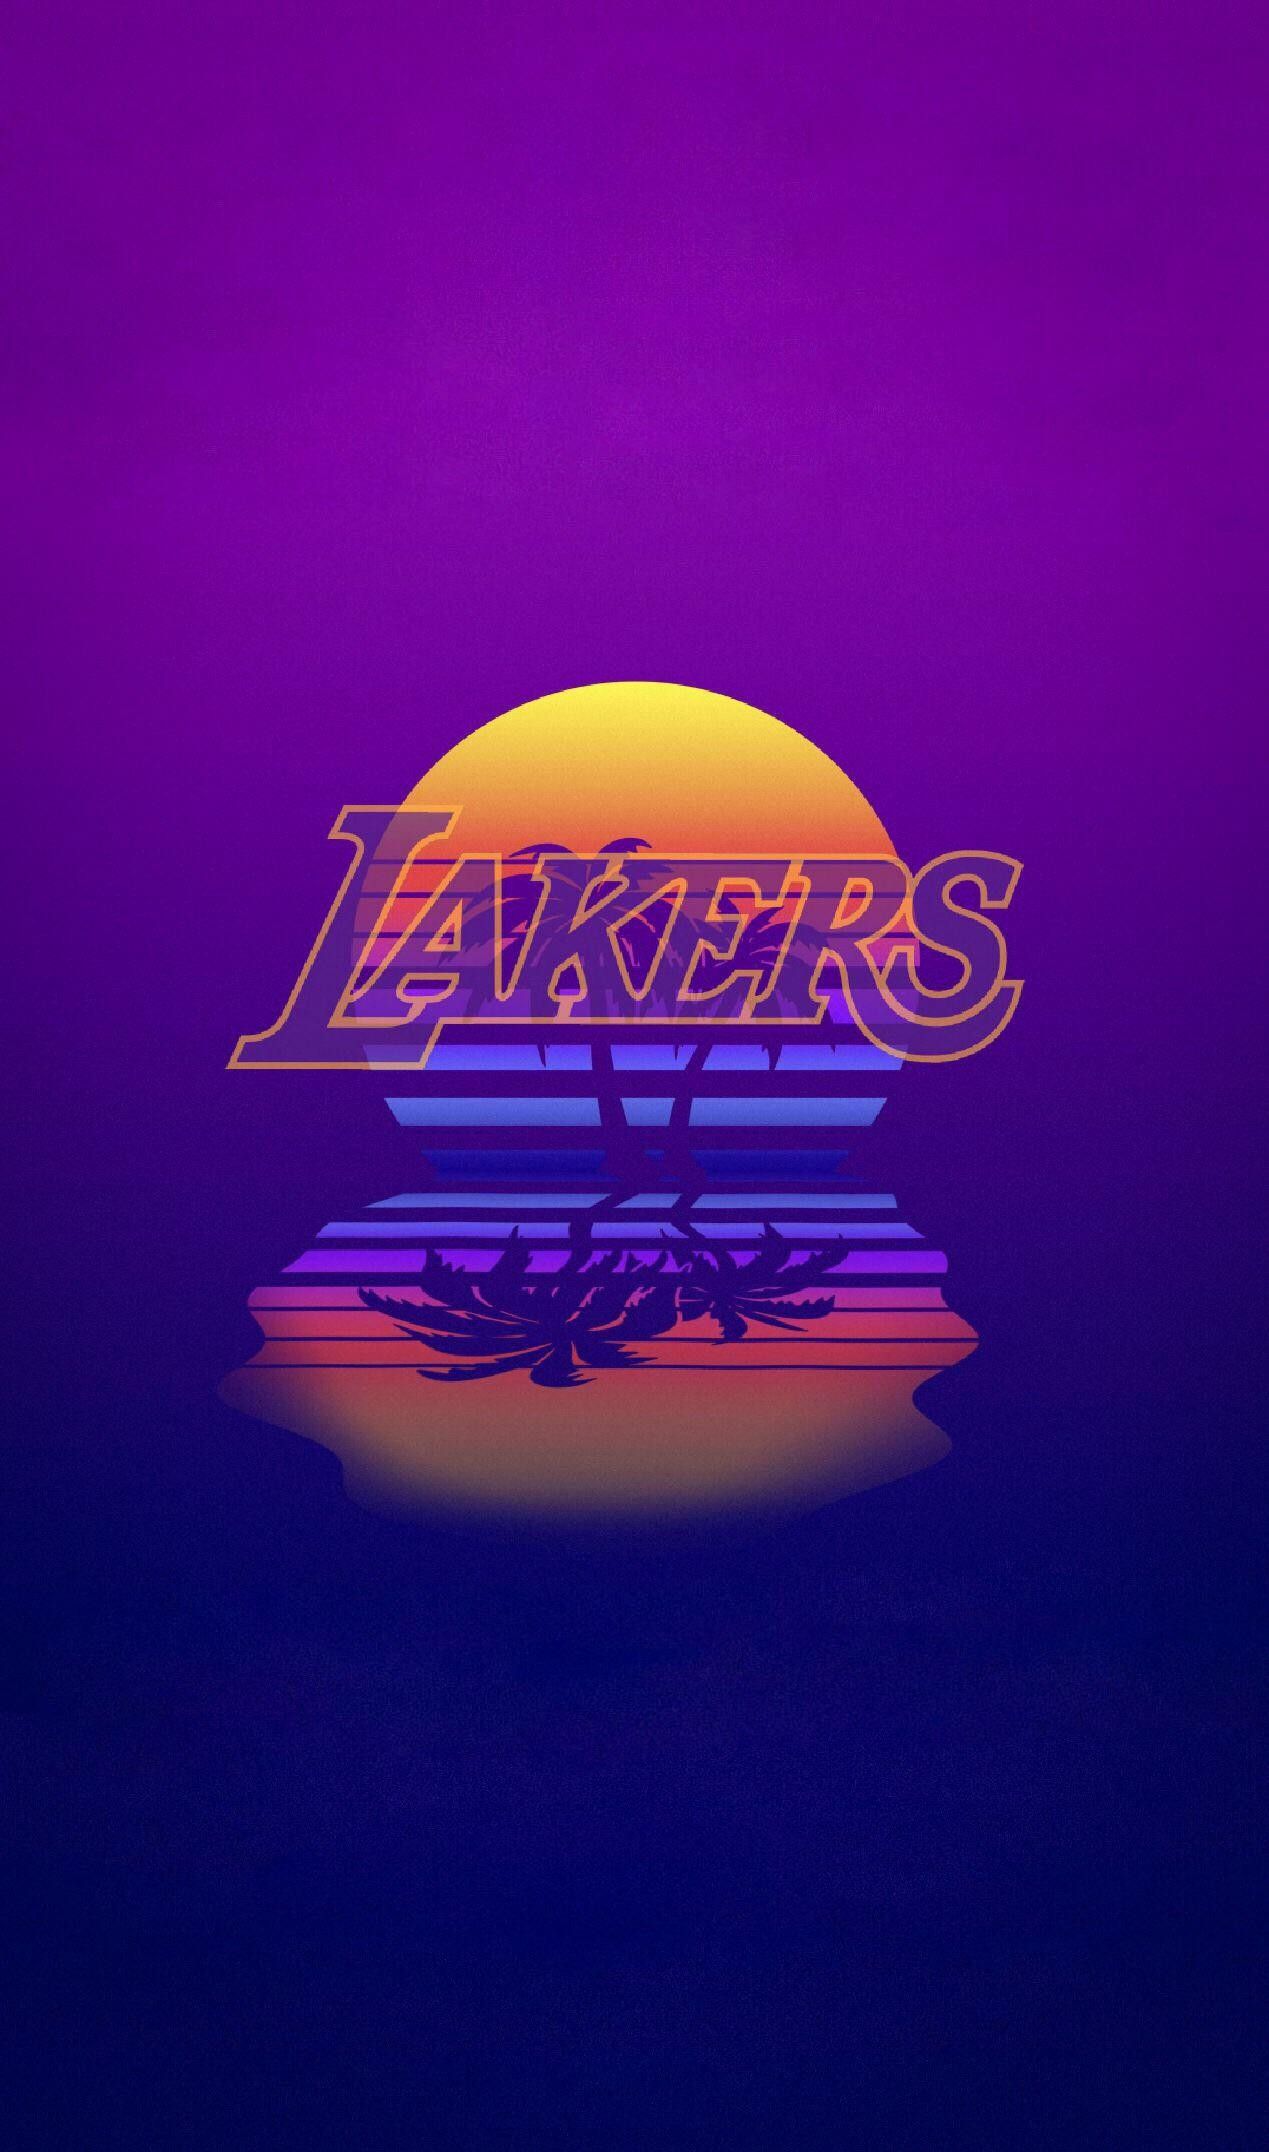 HD lakers wallpapers